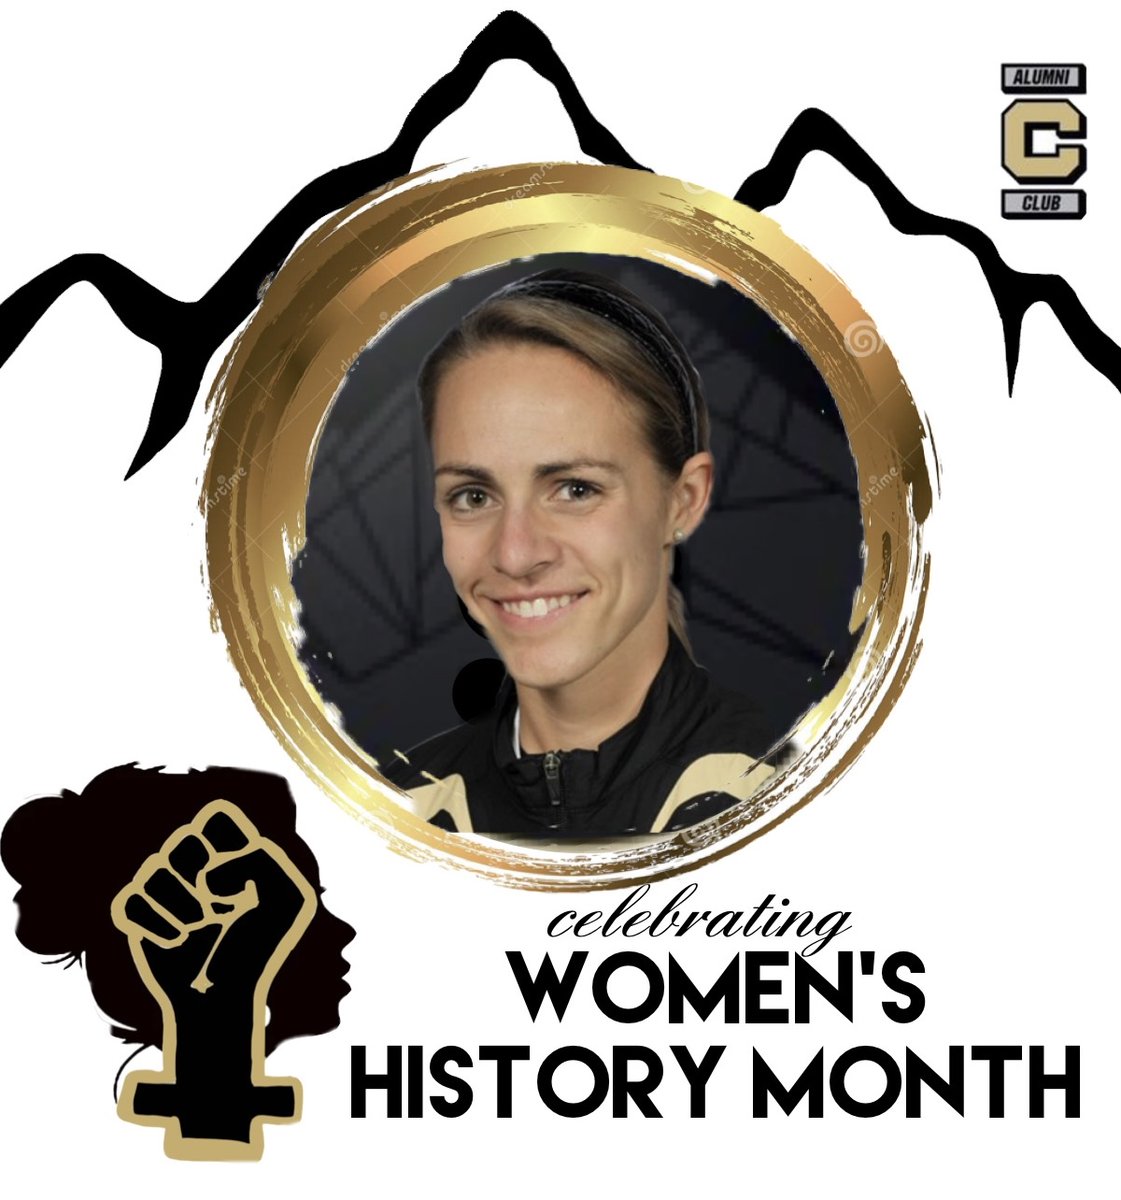 Celebrating #WomensHistoryMonth and exceptional Colorado Hall of Fame Alumni Athletes.  
Thank you, Jenny Barringer CU Women's Track and Field, for leading the way and being a role model for all future female Buffaloes! @trackjenny https://t.co/sWFBdoMsrK